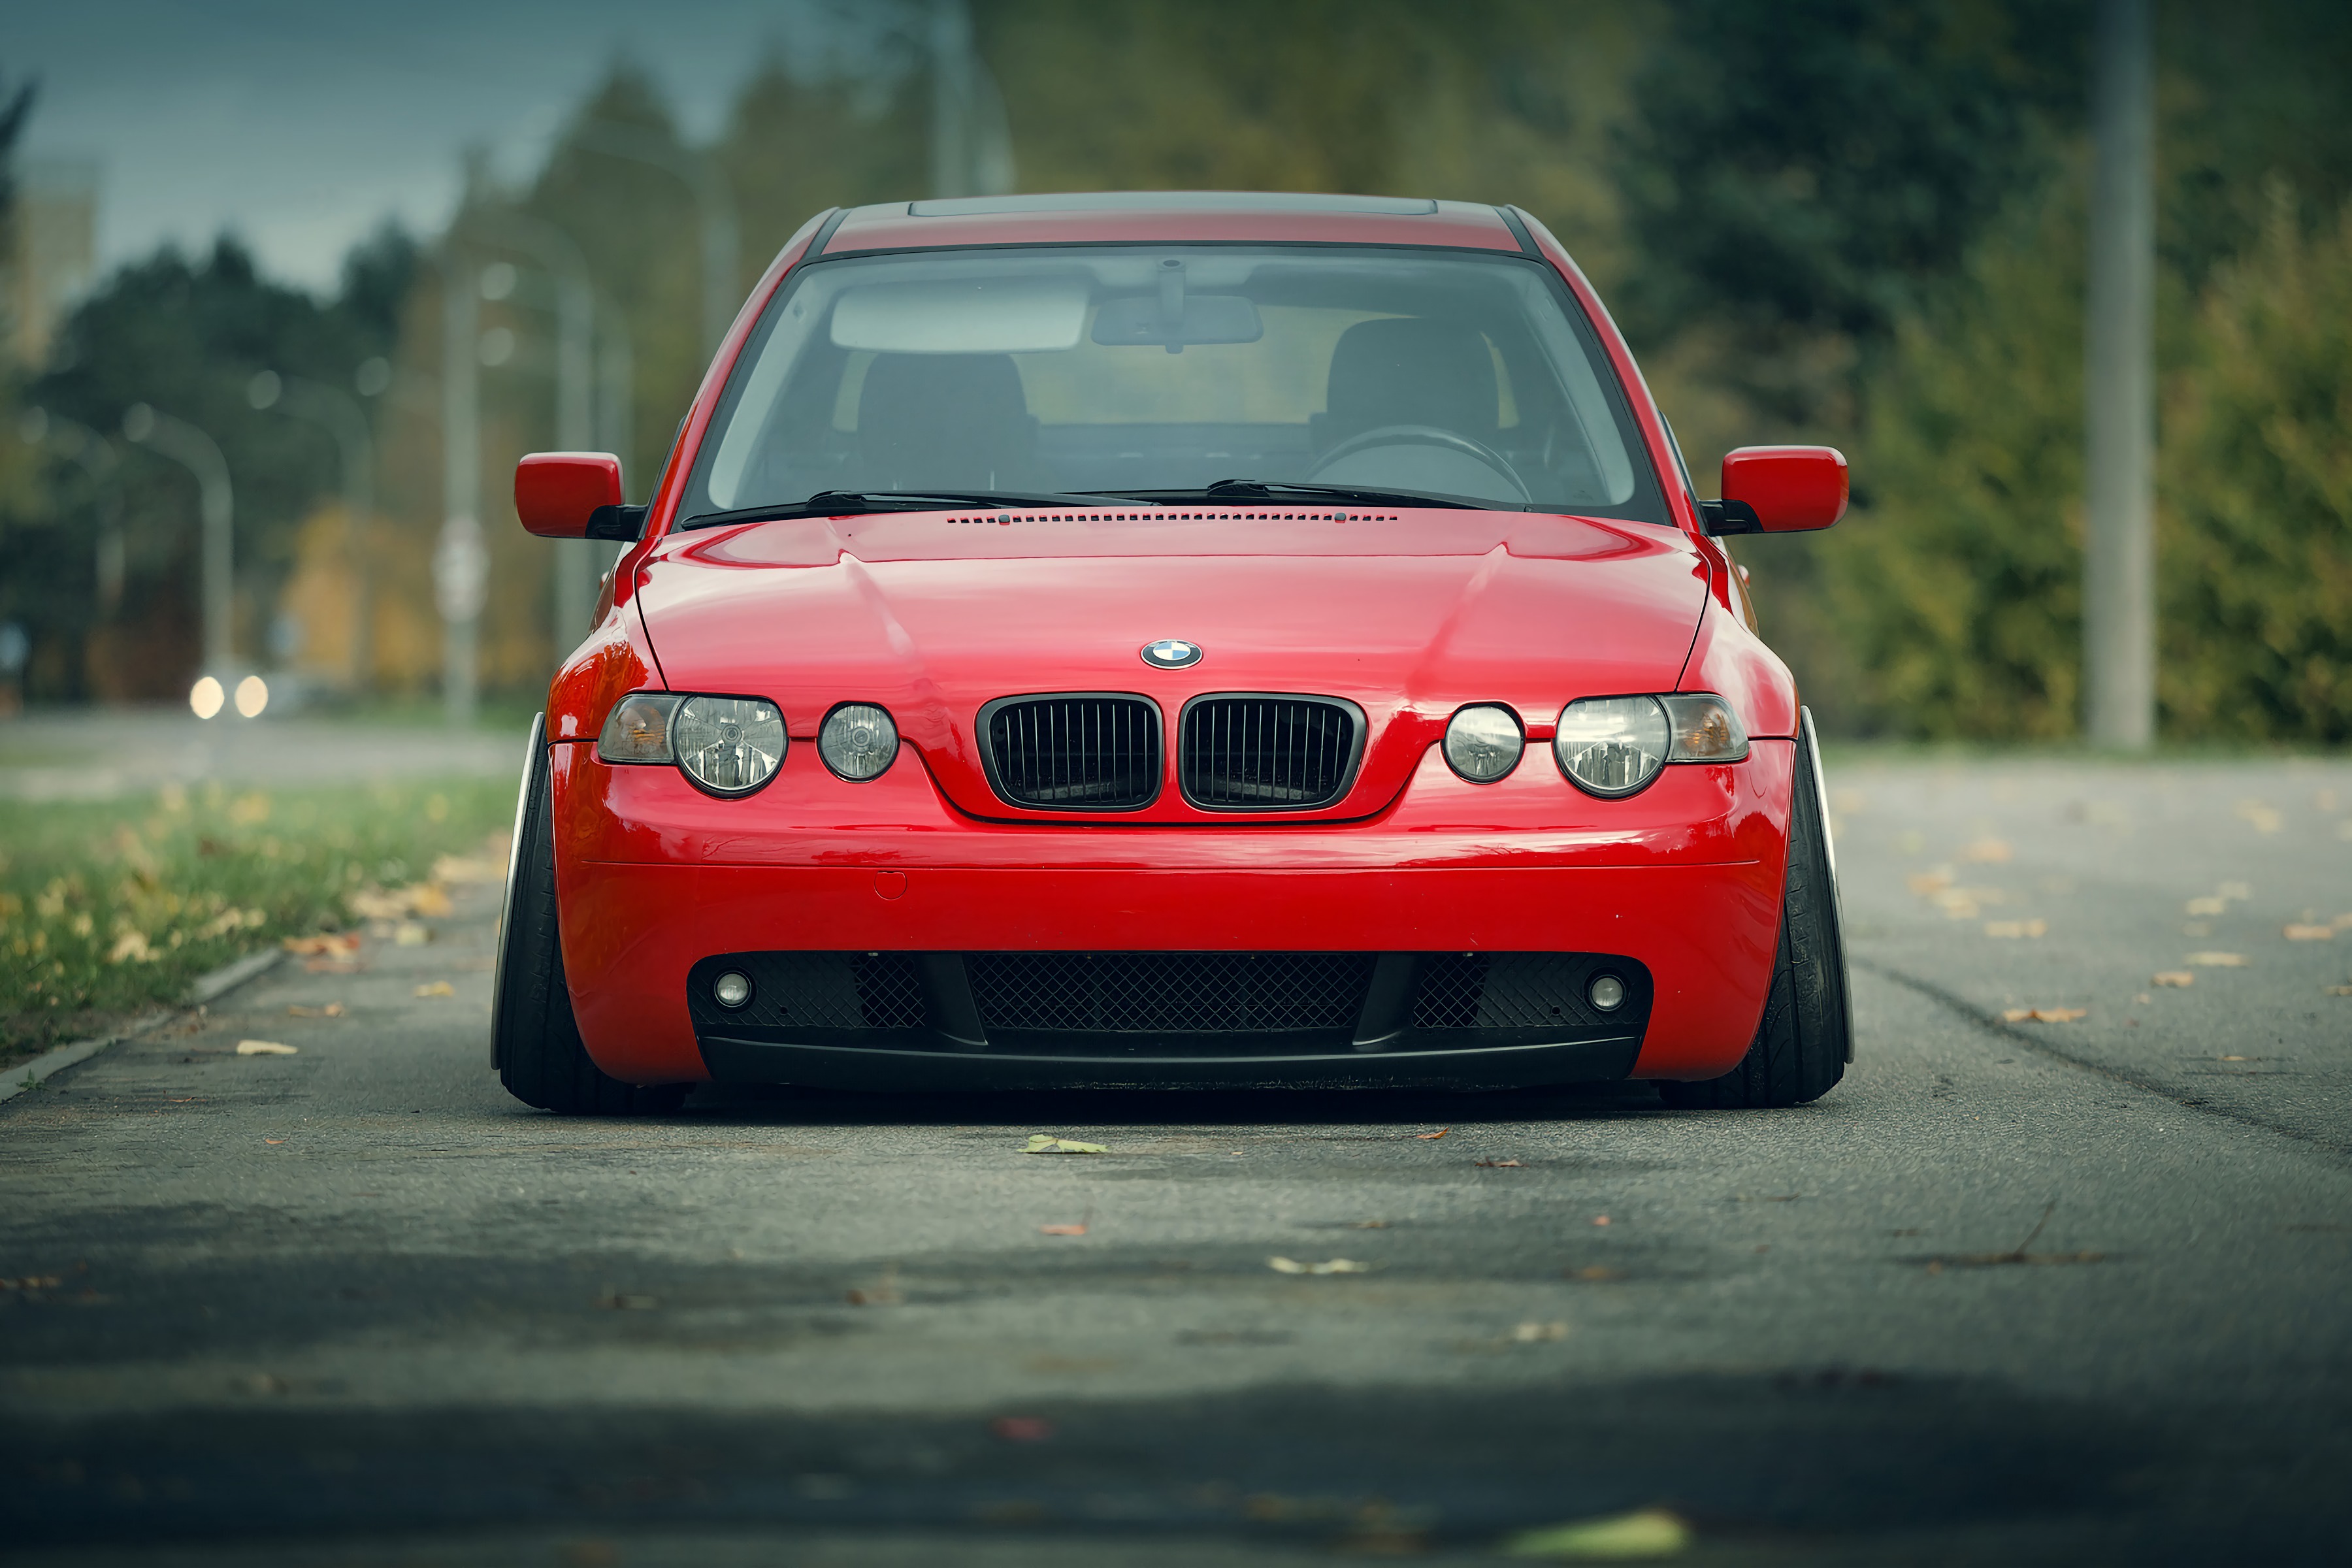 General 3600x2400 BMW stance (cars) Work Wheels red car BMW E46/5 BMW 3 Series frontal view vehicle German cars